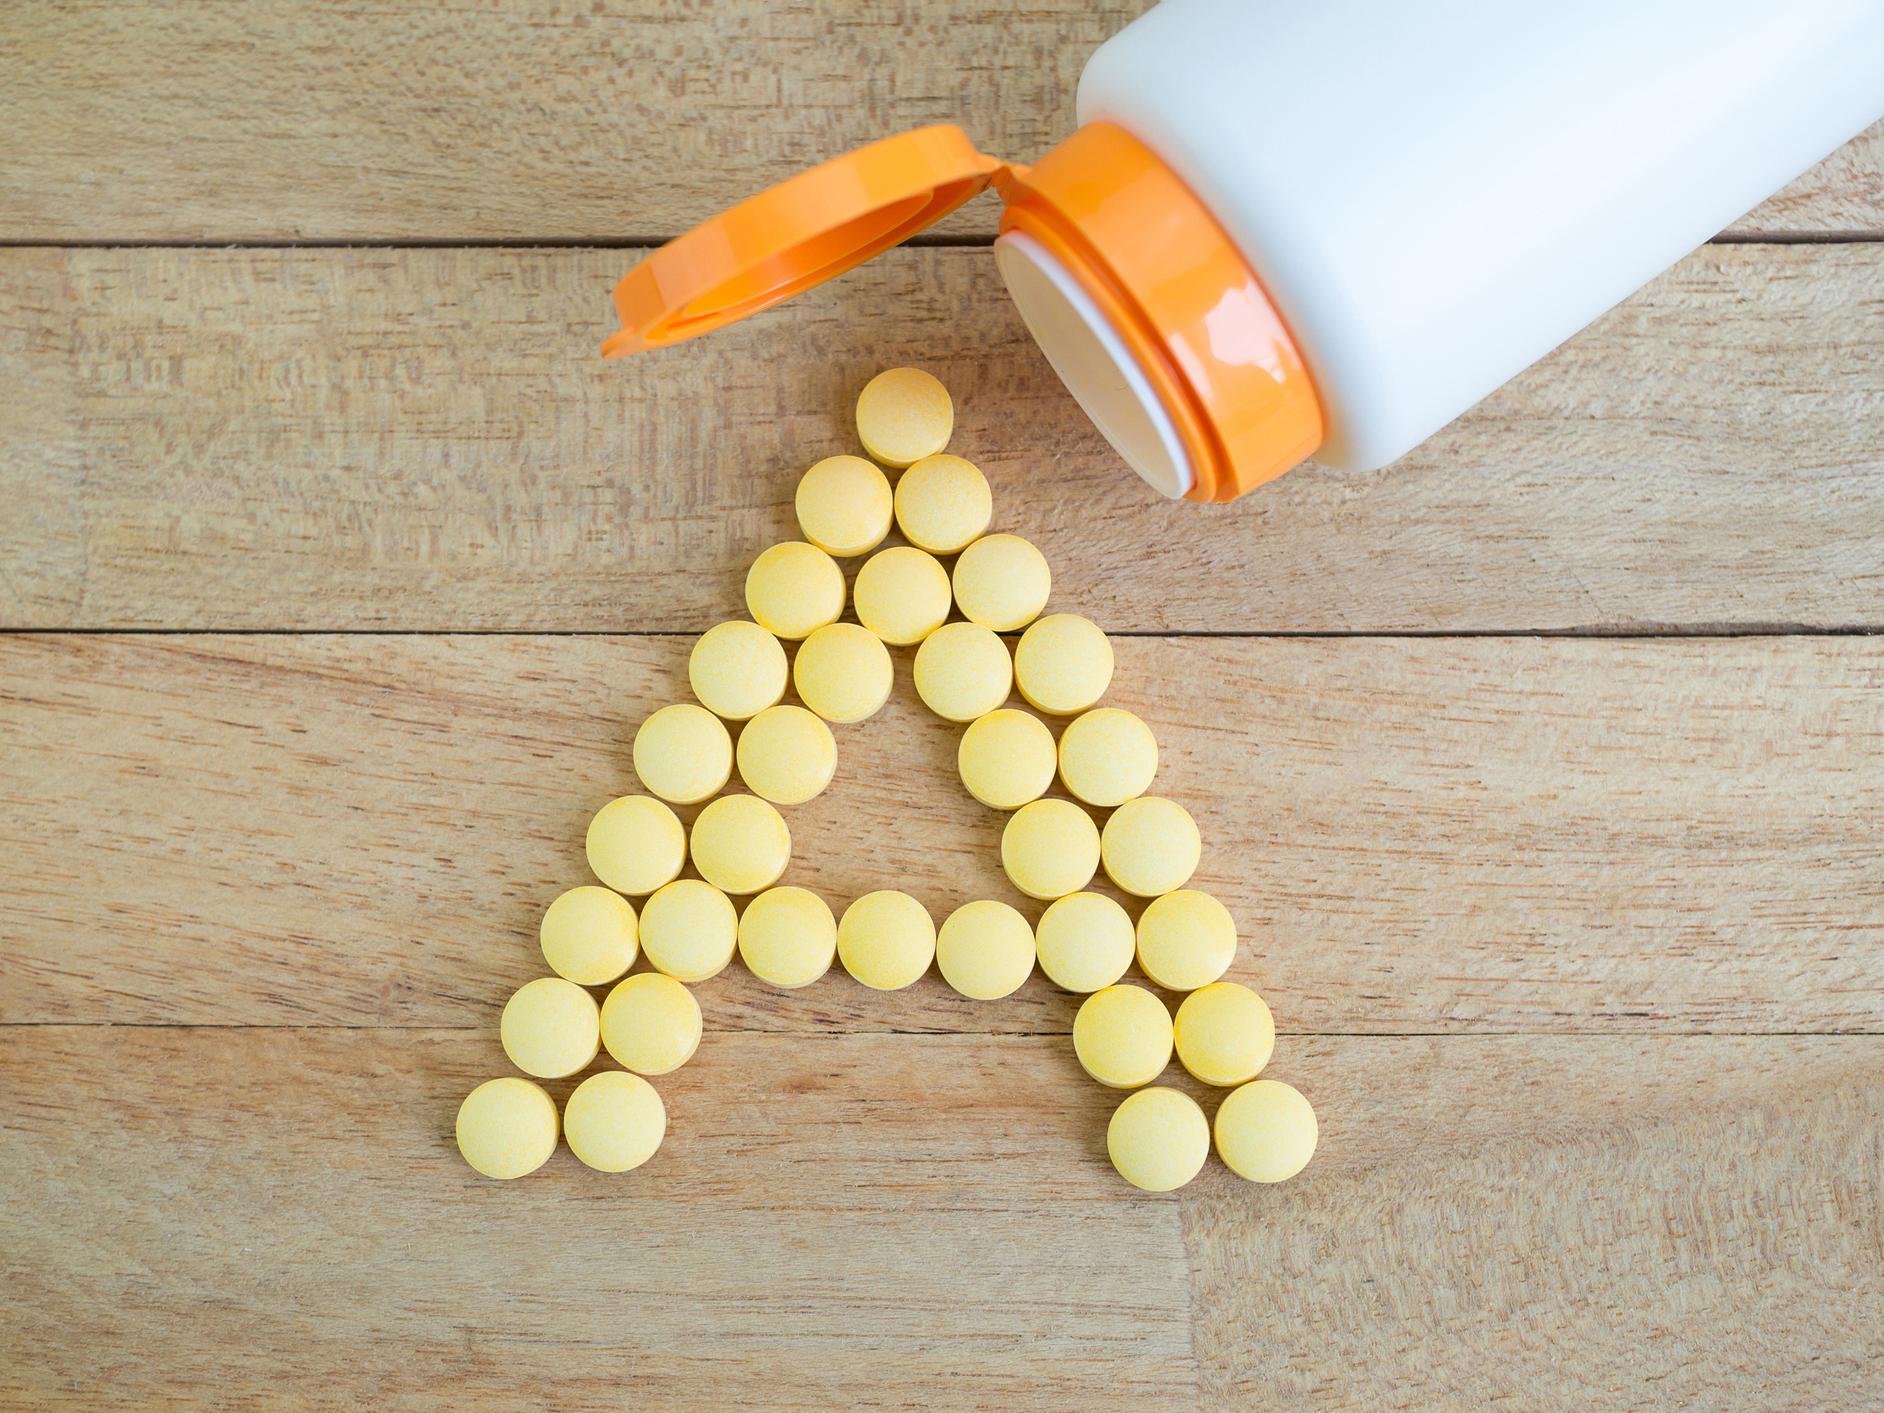 When over-supplementing can harm your bones